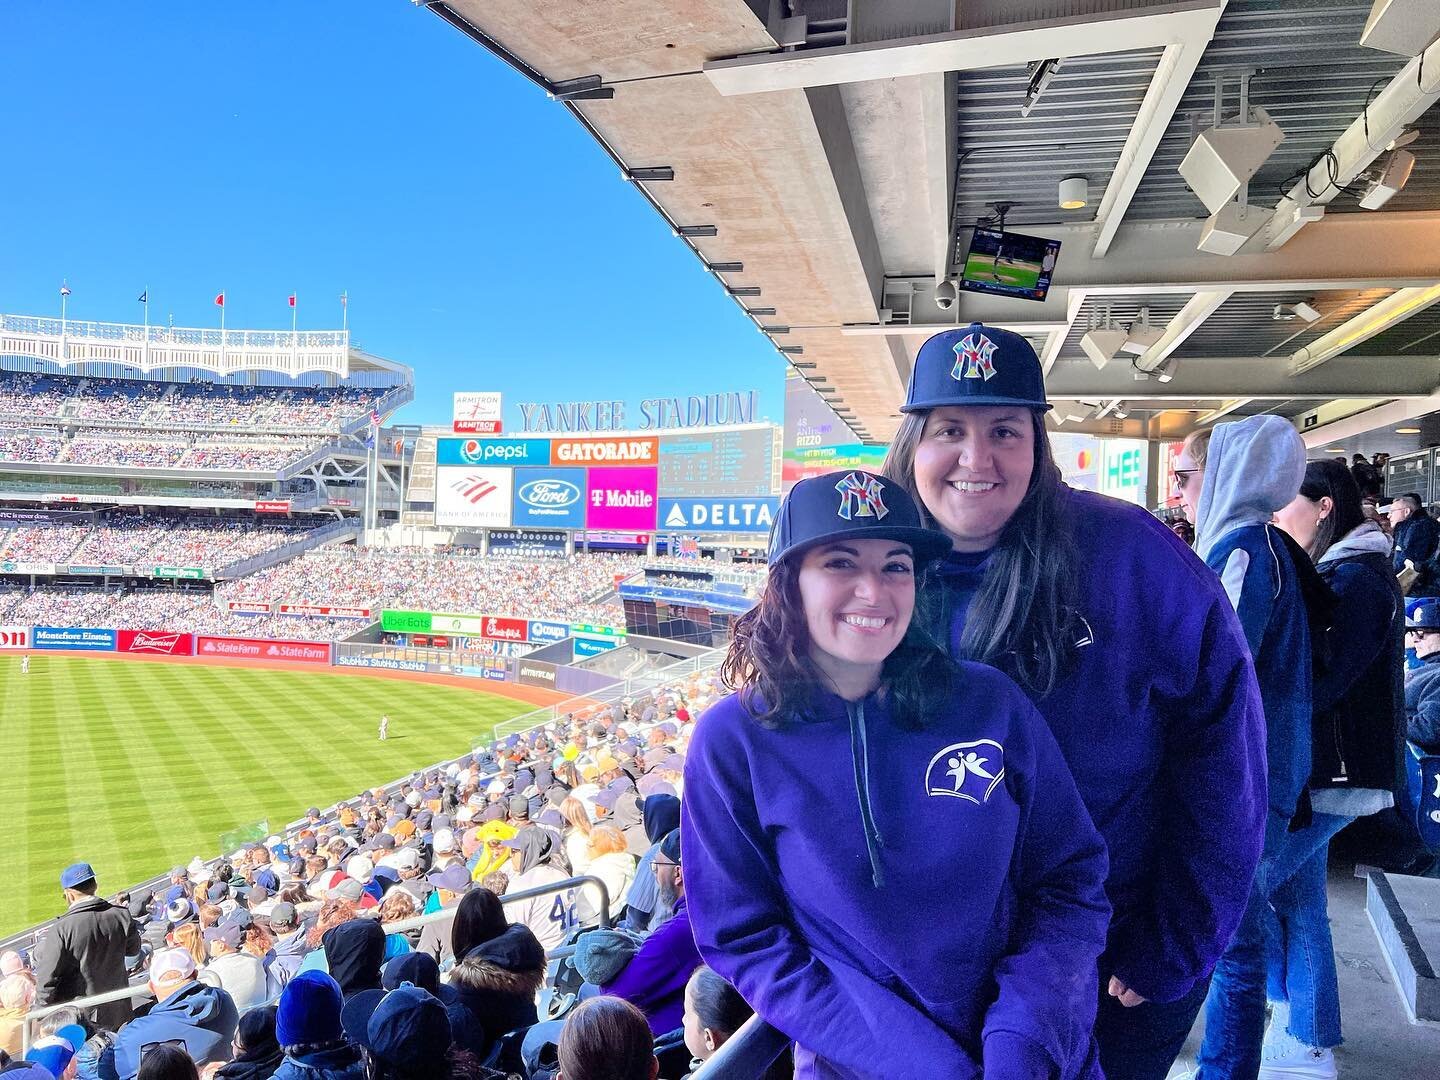 We had such a blast celebrating #worldautismawarenessday with the @yankees. A big THANK YOU to all who came out and joined us at the game! Together we raised over $350 and got to see a fun (but chilly) Yankees victory!